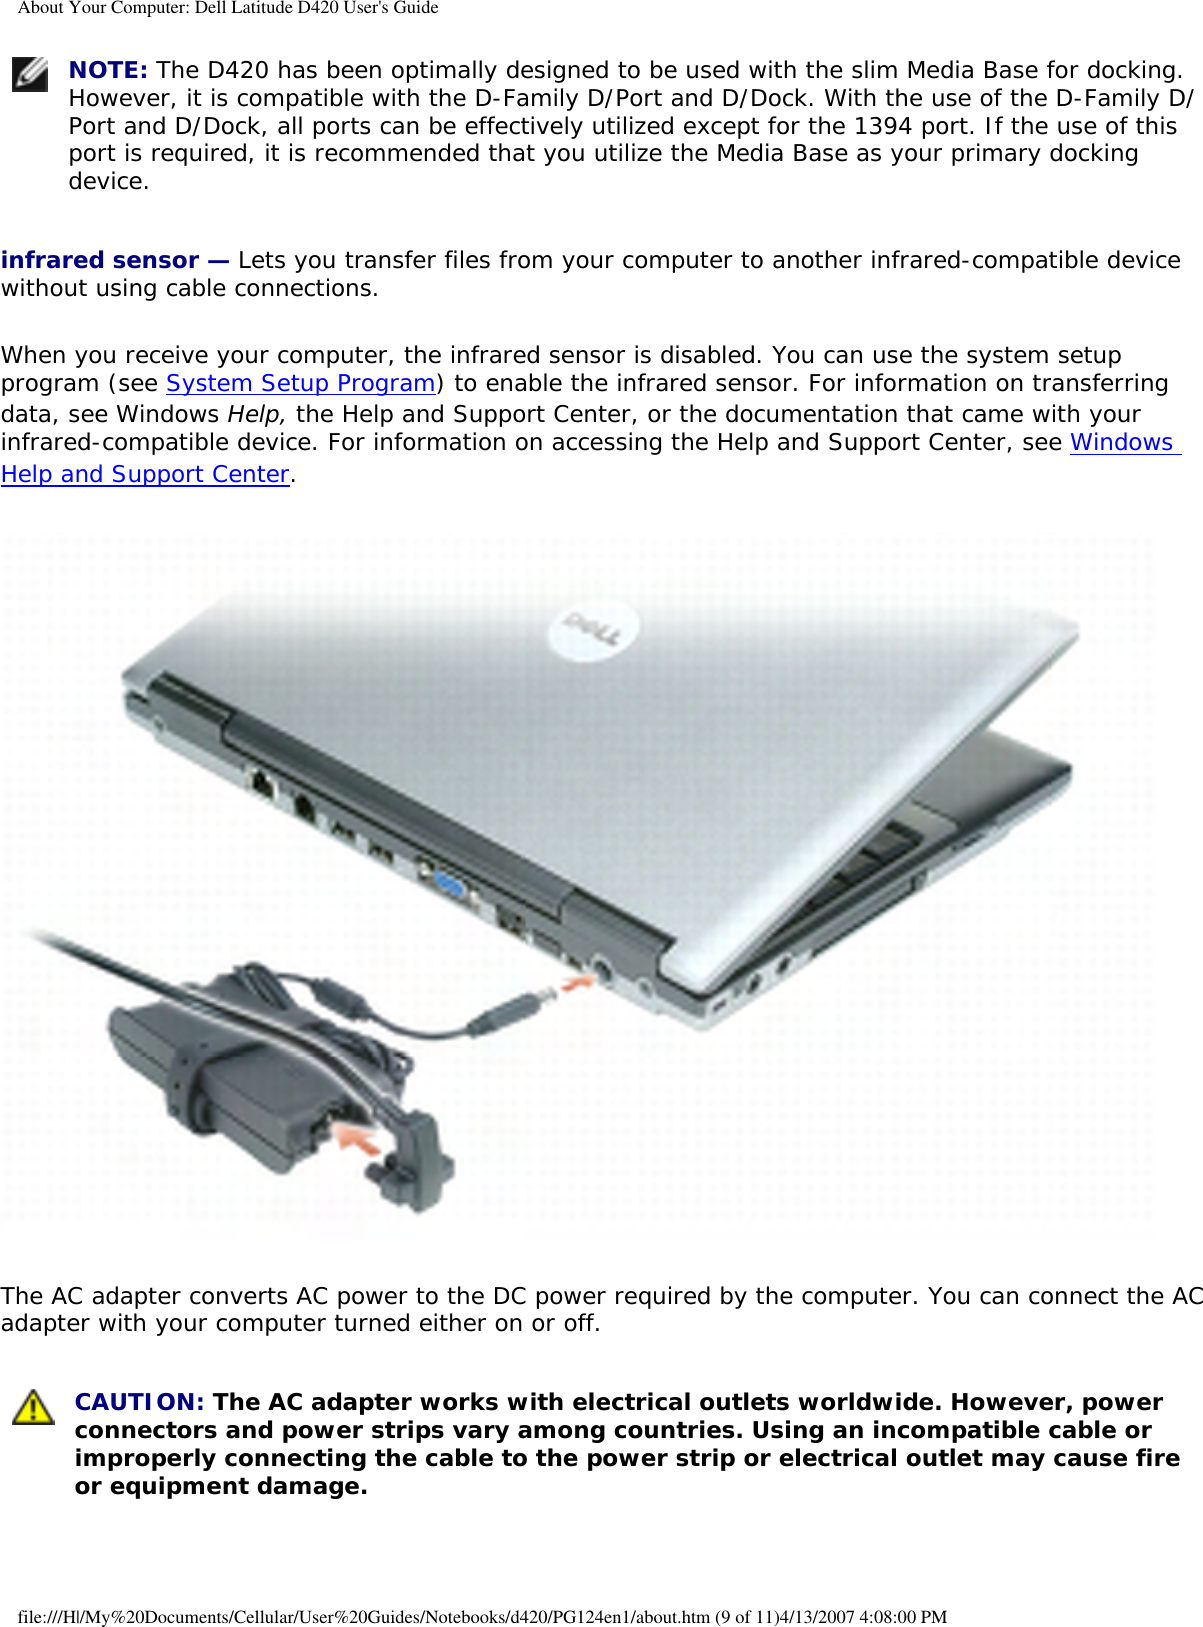 About Your Computer: Dell Latitude D420 User&apos;s Guide NOTE: The D420 has been optimally designed to be used with the slim Media Base for docking. However, it is compatible with the D-Family D/Port and D/Dock. With the use of the D-Family D/Port and D/Dock, all ports can be effectively utilized except for the 1394 port. If the use of this port is required, it is recommended that you utilize the Media Base as your primary docking device. infrared sensor — Lets you transfer files from your computer to another infrared-compatible device without using cable connections.When you receive your computer, the infrared sensor is disabled. You can use the system setup program (see System Setup Program) to enable the infrared sensor. For information on transferring data, see Windows Help, the Help and Support Center, or the documentation that came with your infrared-compatible device. For information on accessing the Help and Support Center, see Windows Help and Support Center. The AC adapter converts AC power to the DC power required by the computer. You can connect the AC adapter with your computer turned either on or off. CAUTION: The AC adapter works with electrical outlets worldwide. However, power connectors and power strips vary among countries. Using an incompatible cable or improperly connecting the cable to the power strip or electrical outlet may cause fire or equipment damage. file:///H|/My%20Documents/Cellular/User%20Guides/Notebooks/d420/PG124en1/about.htm (9 of 11)4/13/2007 4:08:00 PM